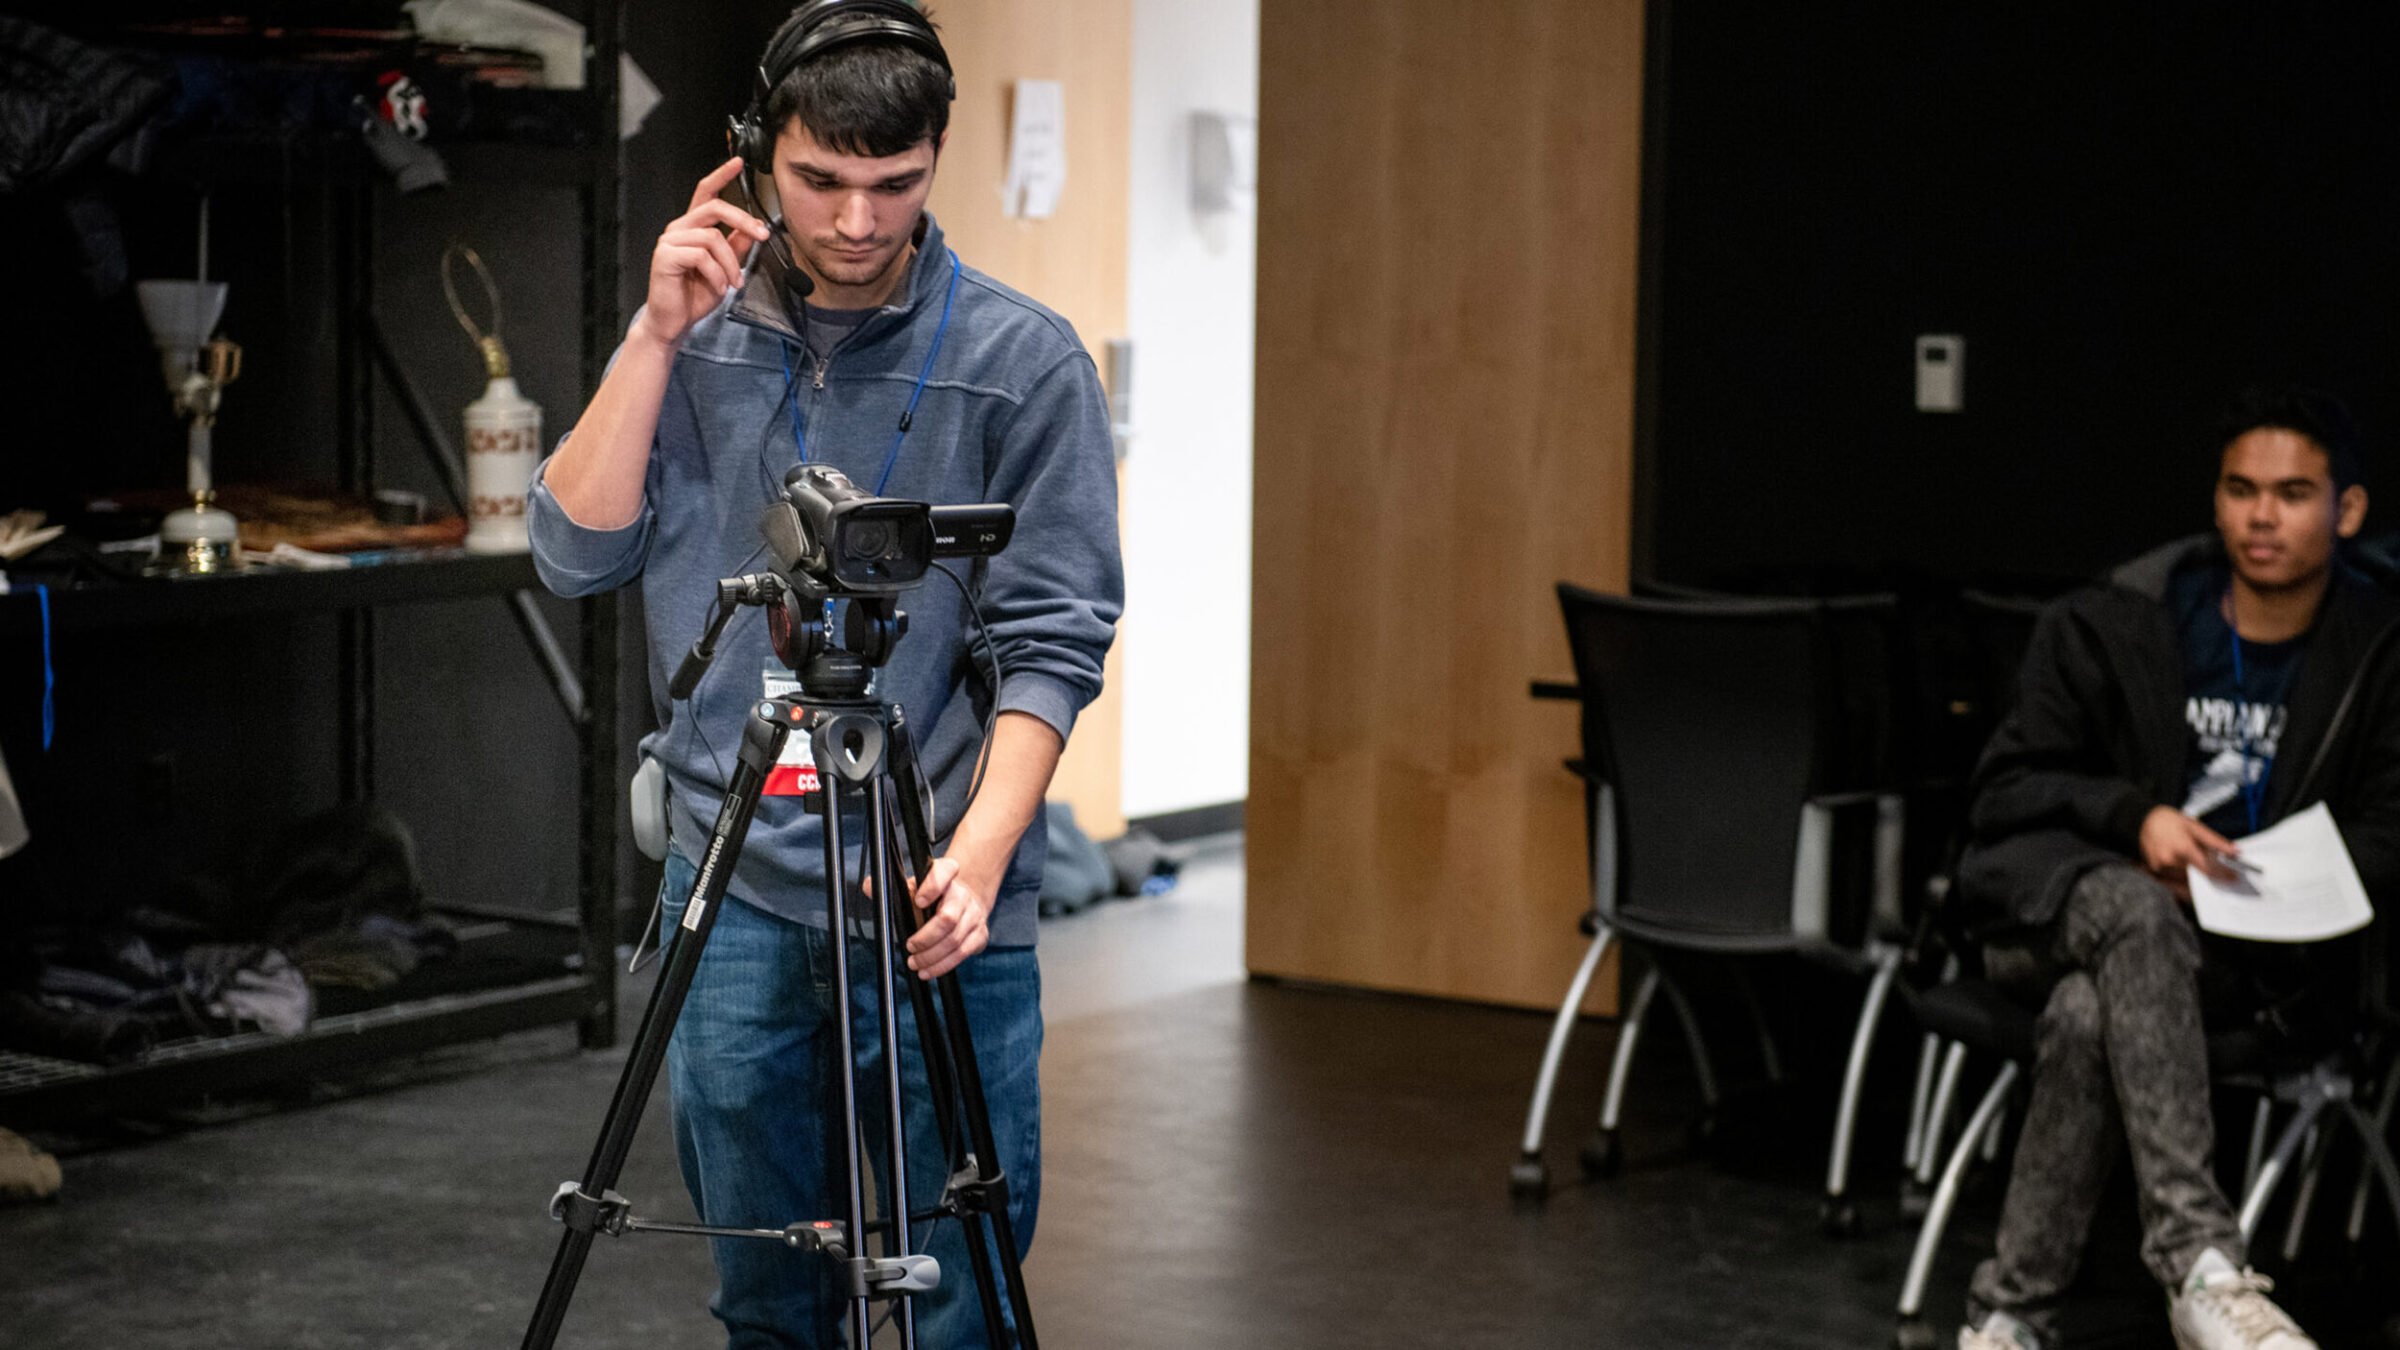 student operates video camera during a live shoot